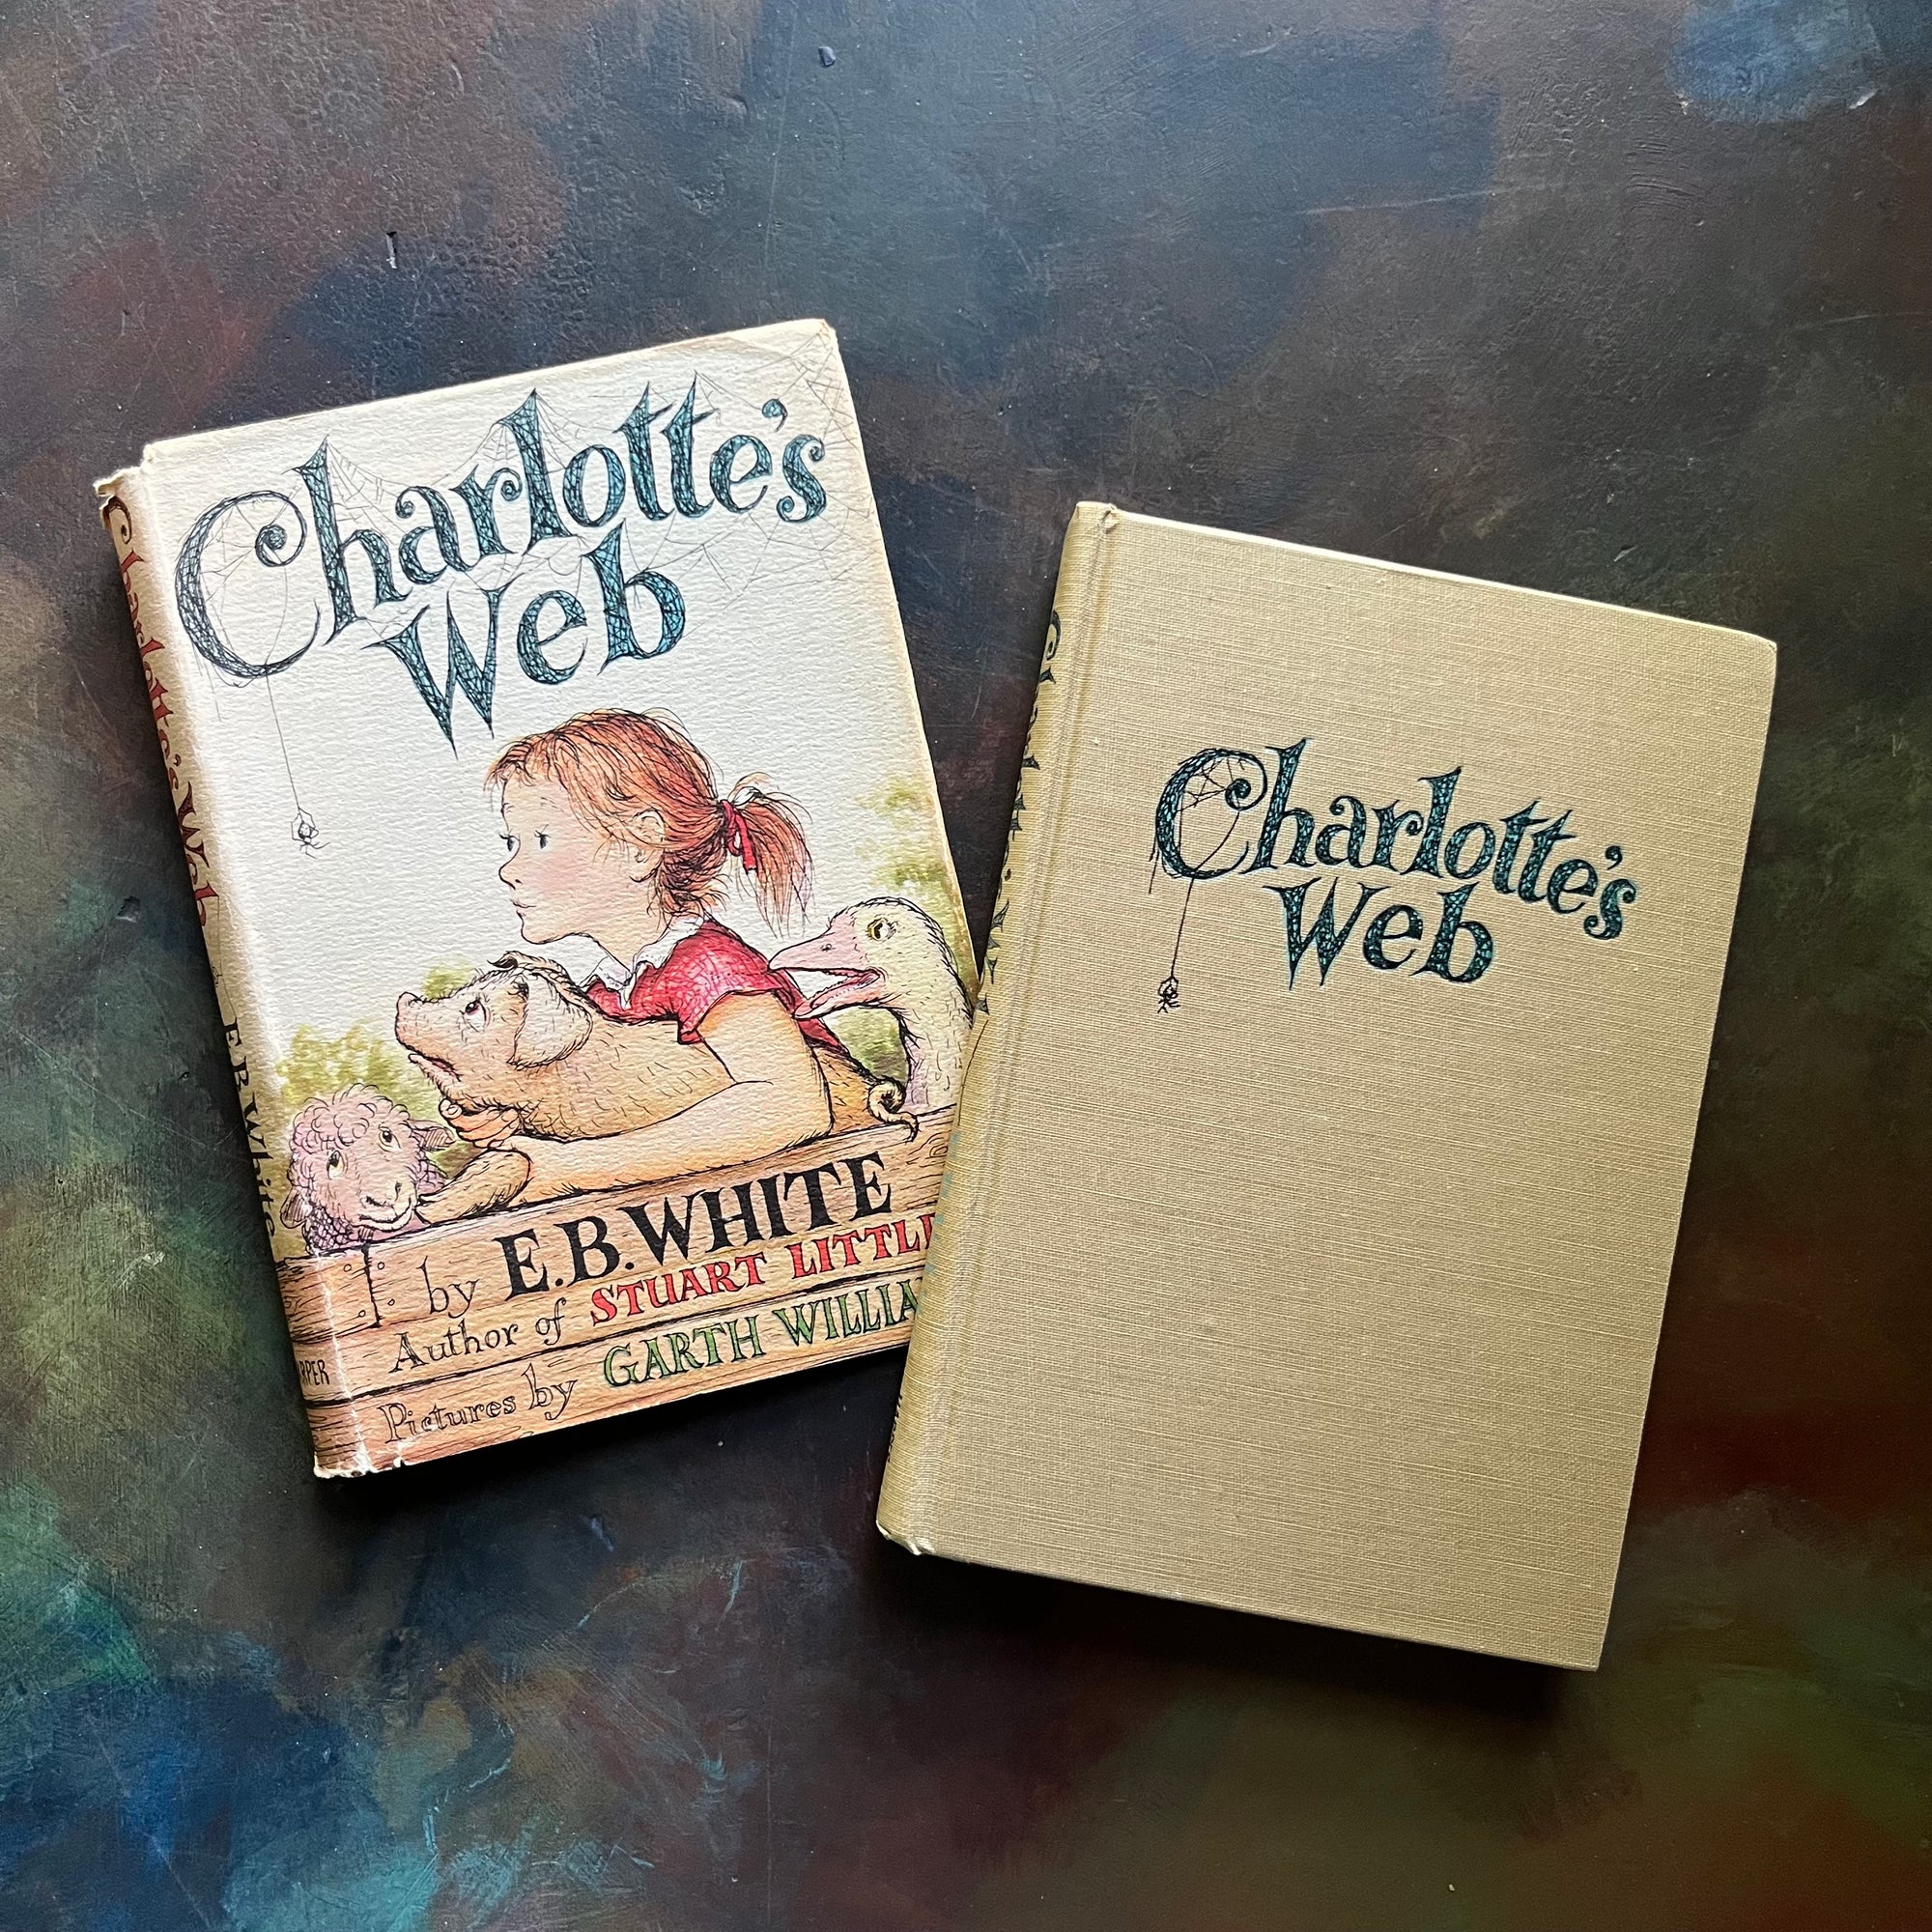 Stated First Edition of Charlotte's Web by E. B. White with Illustrations by Garth Williams